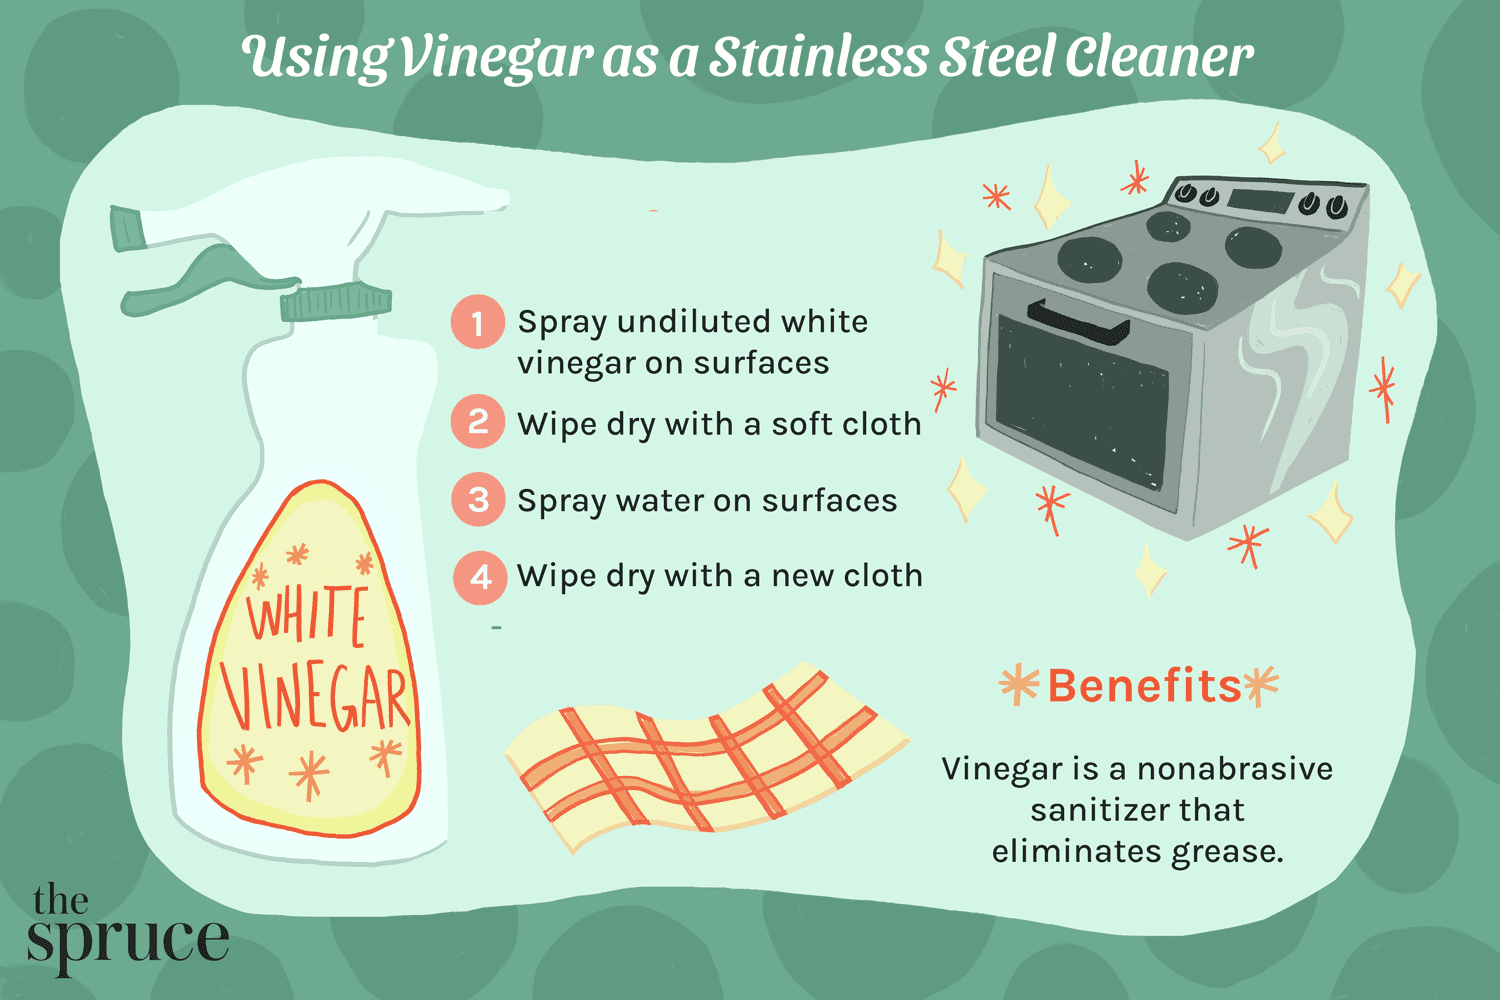 Using Vinegar as a Stainless Steel Cleaner